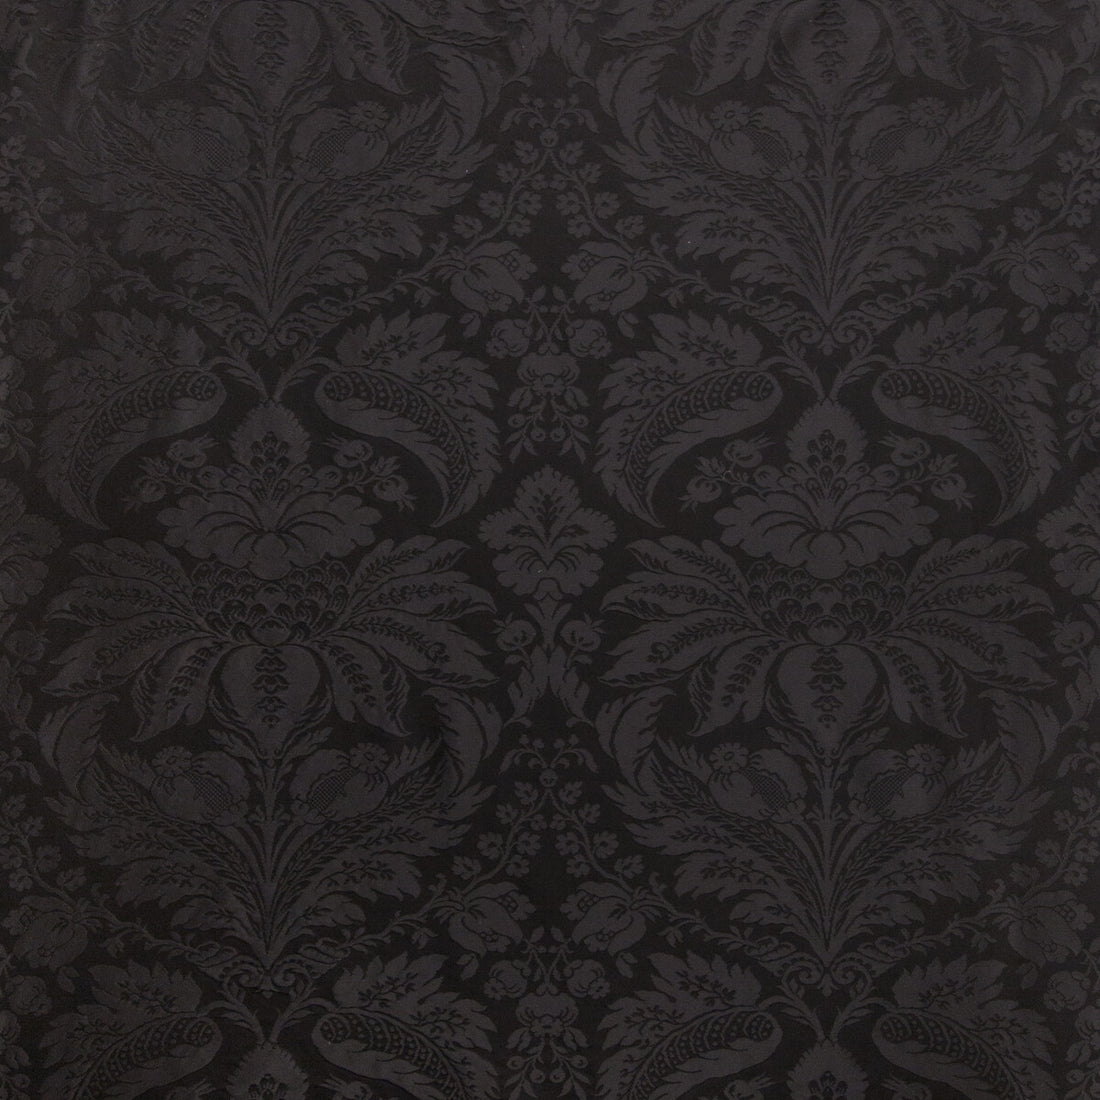 Damask Pierre fabric in black color - pattern 8013188.8.0 - by Brunschwig &amp; Fils in the B&amp;F Showroom Exclusive 2019 collection